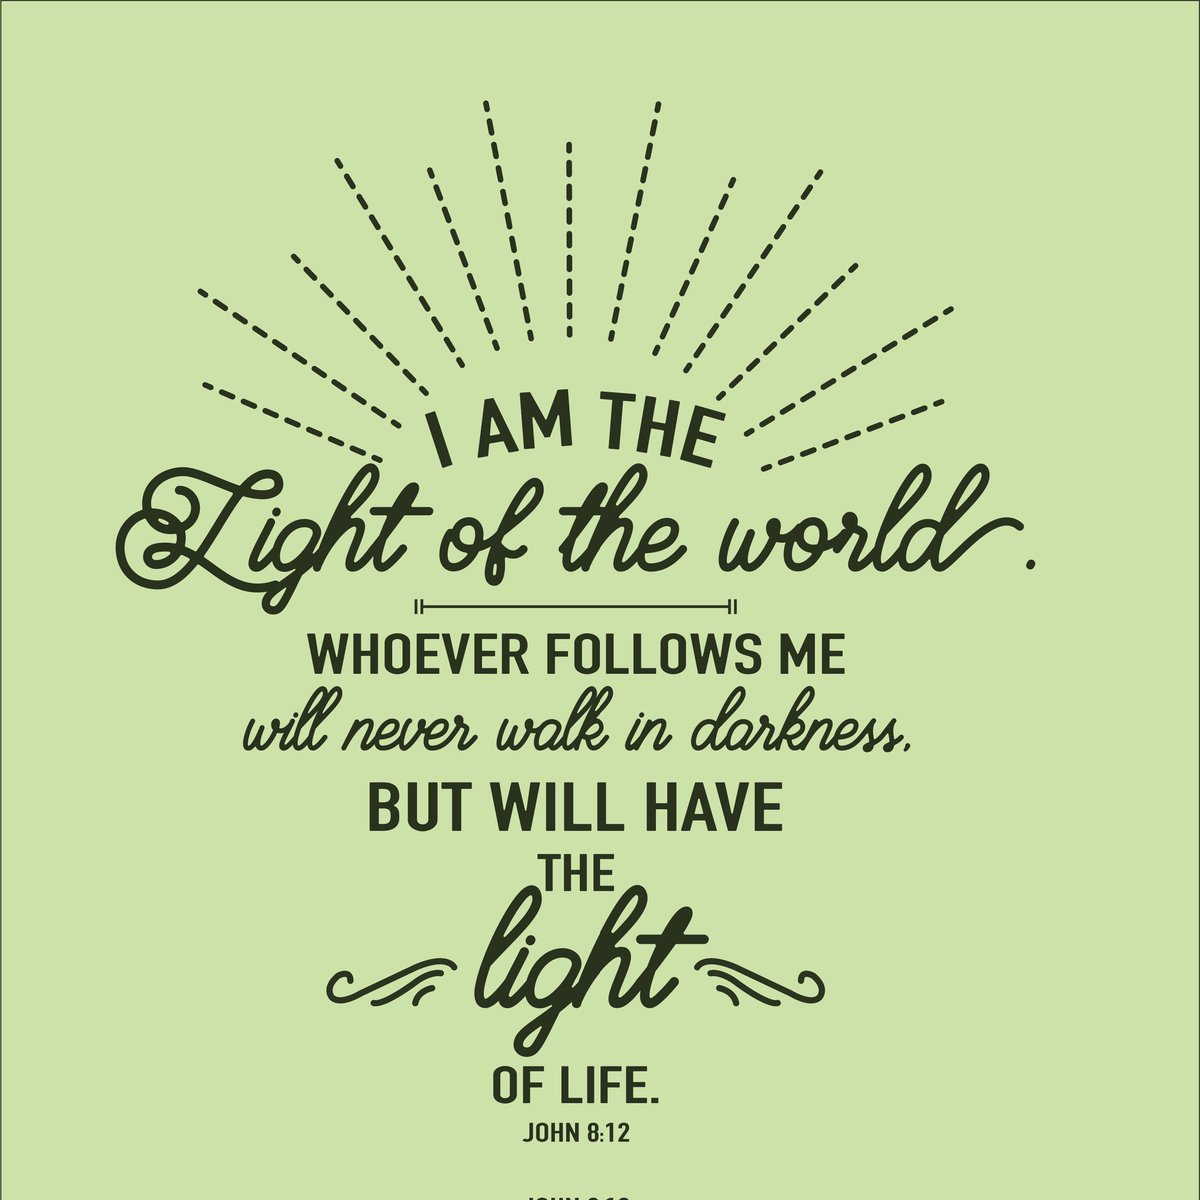 John 8:12 NASB Then Jesus again spoke to them, saying, “I am the Light of the world; he who follows Me will not walk in the darkness, but will have the Light of life.” #dailybread #dailyverse #scripture #bibleverse #bible #jesus #light